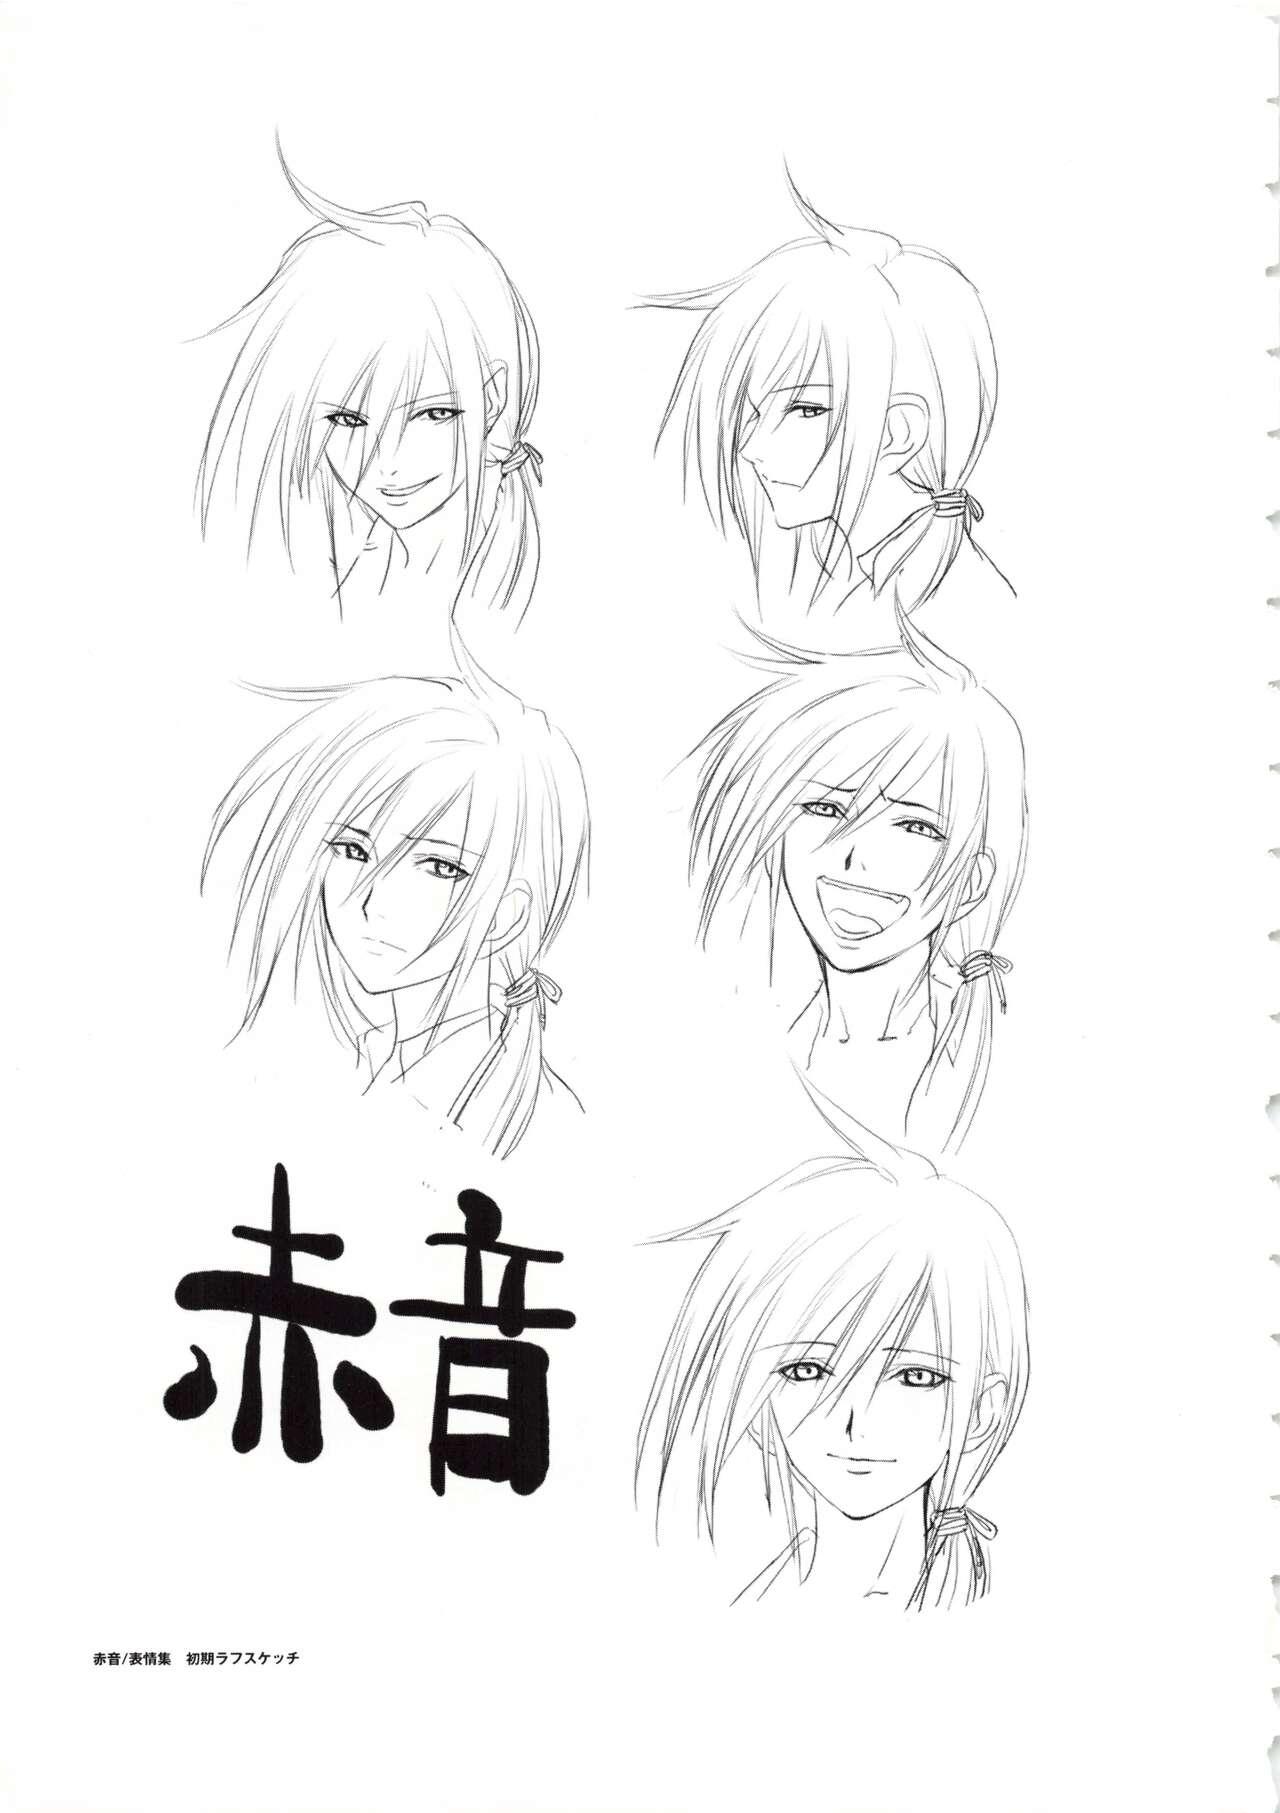 Letsdoeit Hanachirasu - Initial Sketches and Unprocessed Illustrations - Selection She - Page 7